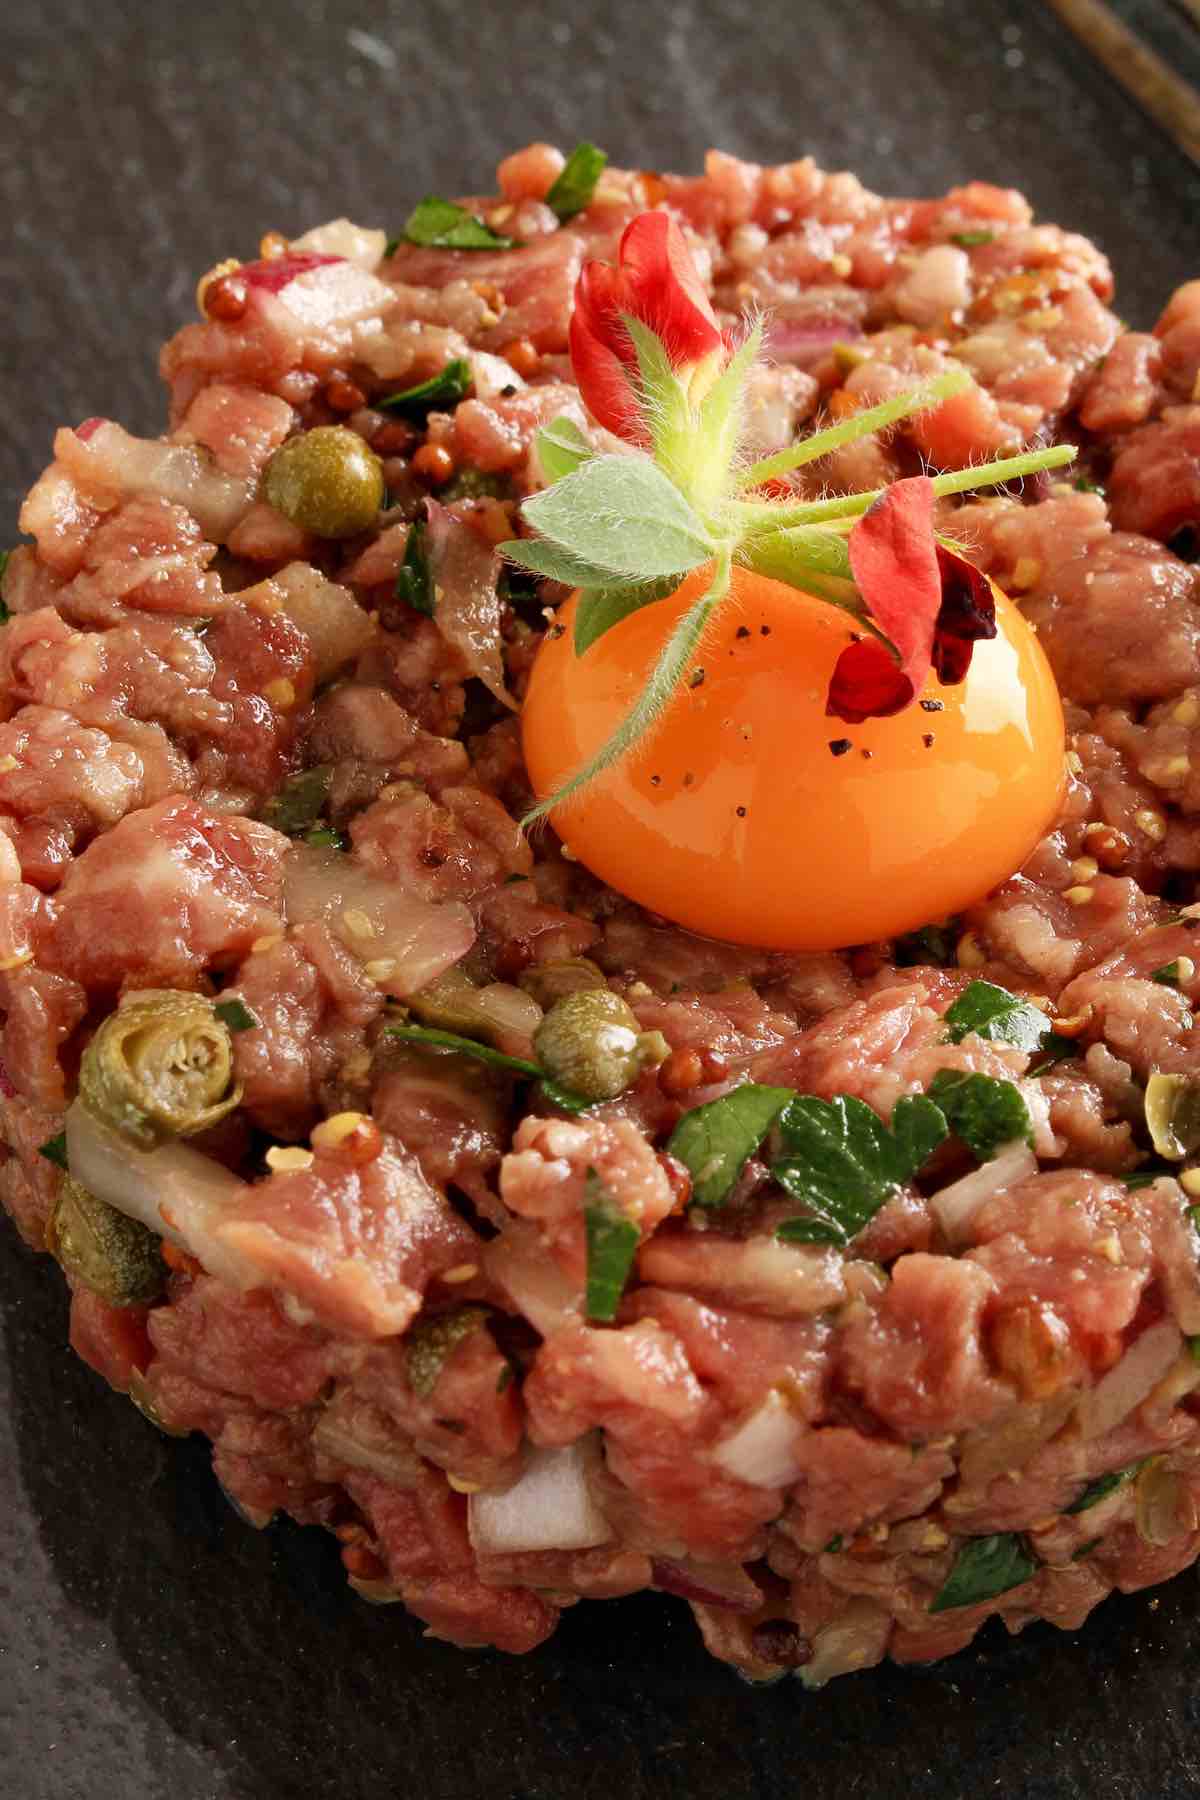 Steak Tartare is meaty, delicious, and full of flavor. Considered a French delicacy, this minced beef tartare is highly revered by foodies and steak connoisseurs who like their steak raw.